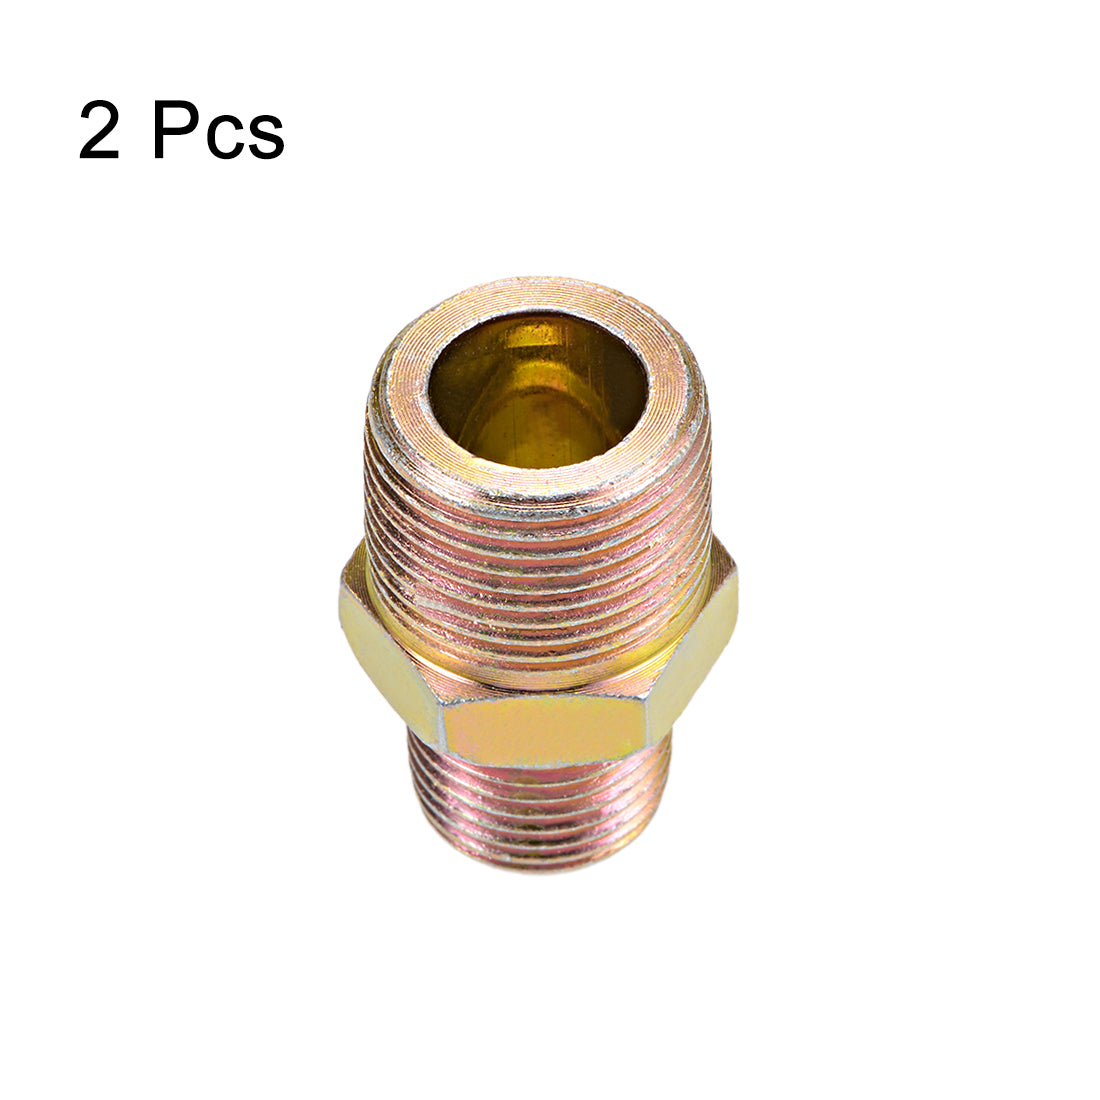 Uxcell Uxcell Reducing Pipe Fitting - Reducer Hex Nipple - 1 X 3/4 BSP Male Connector Zinc Finish Plating 2Pcs